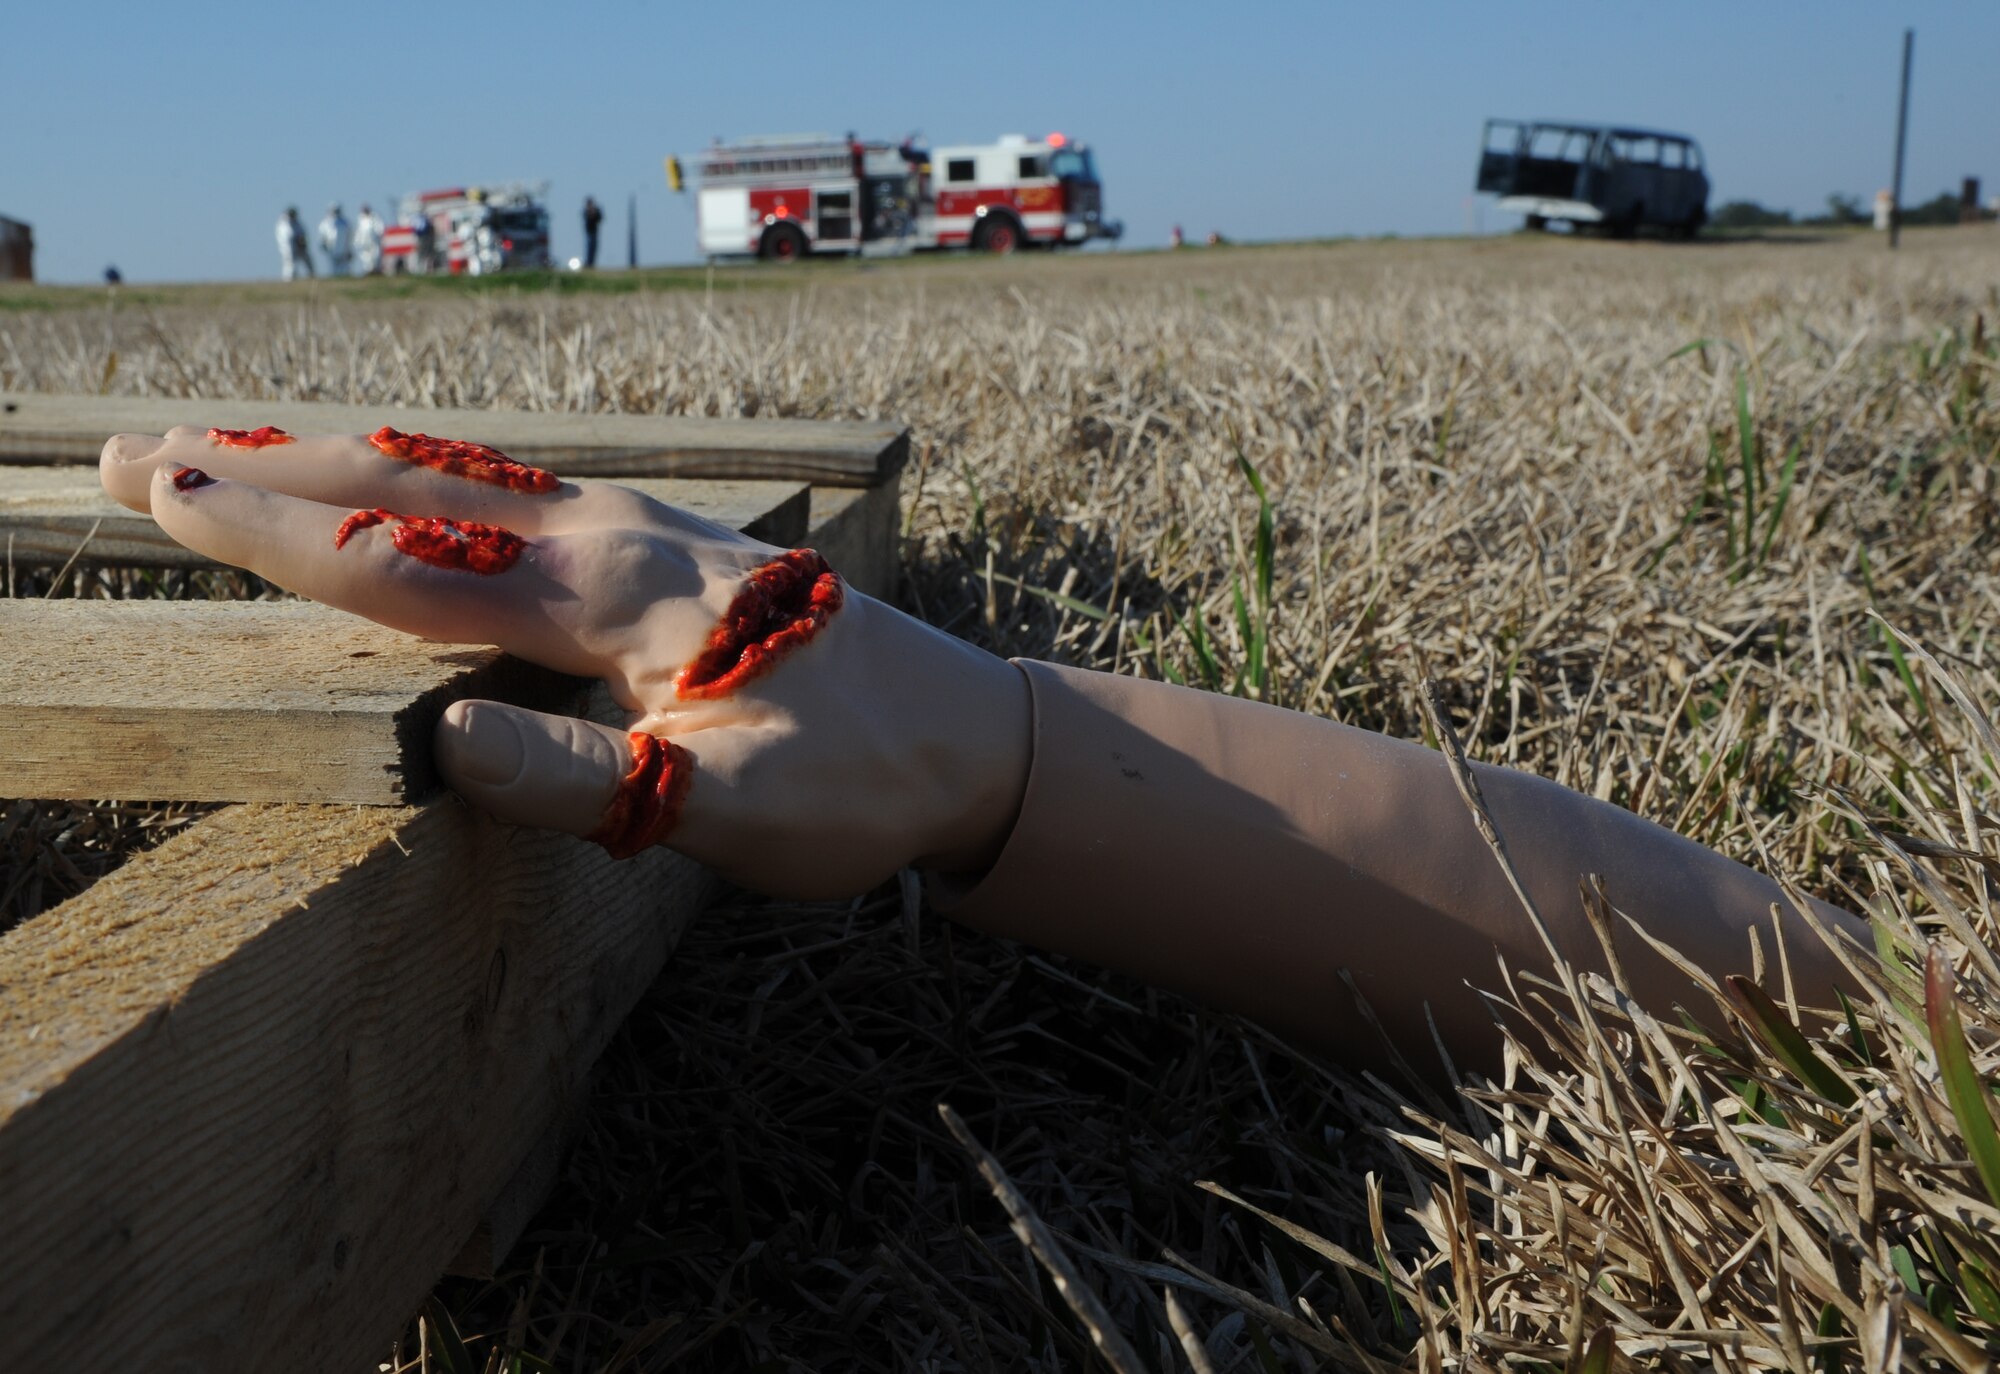 Simulated body parts lay in an open field during a major accident response exercise Feb. 12, 2015, on the flight line, Keesler Air Force Base, Miss.  The MARE simulated a C-130J Hercules aircraft crash on base. The exercise was held to test the readiness of Keesler personnel during a major accident.  (U.S. Air Force photo by Kemberly Groue)